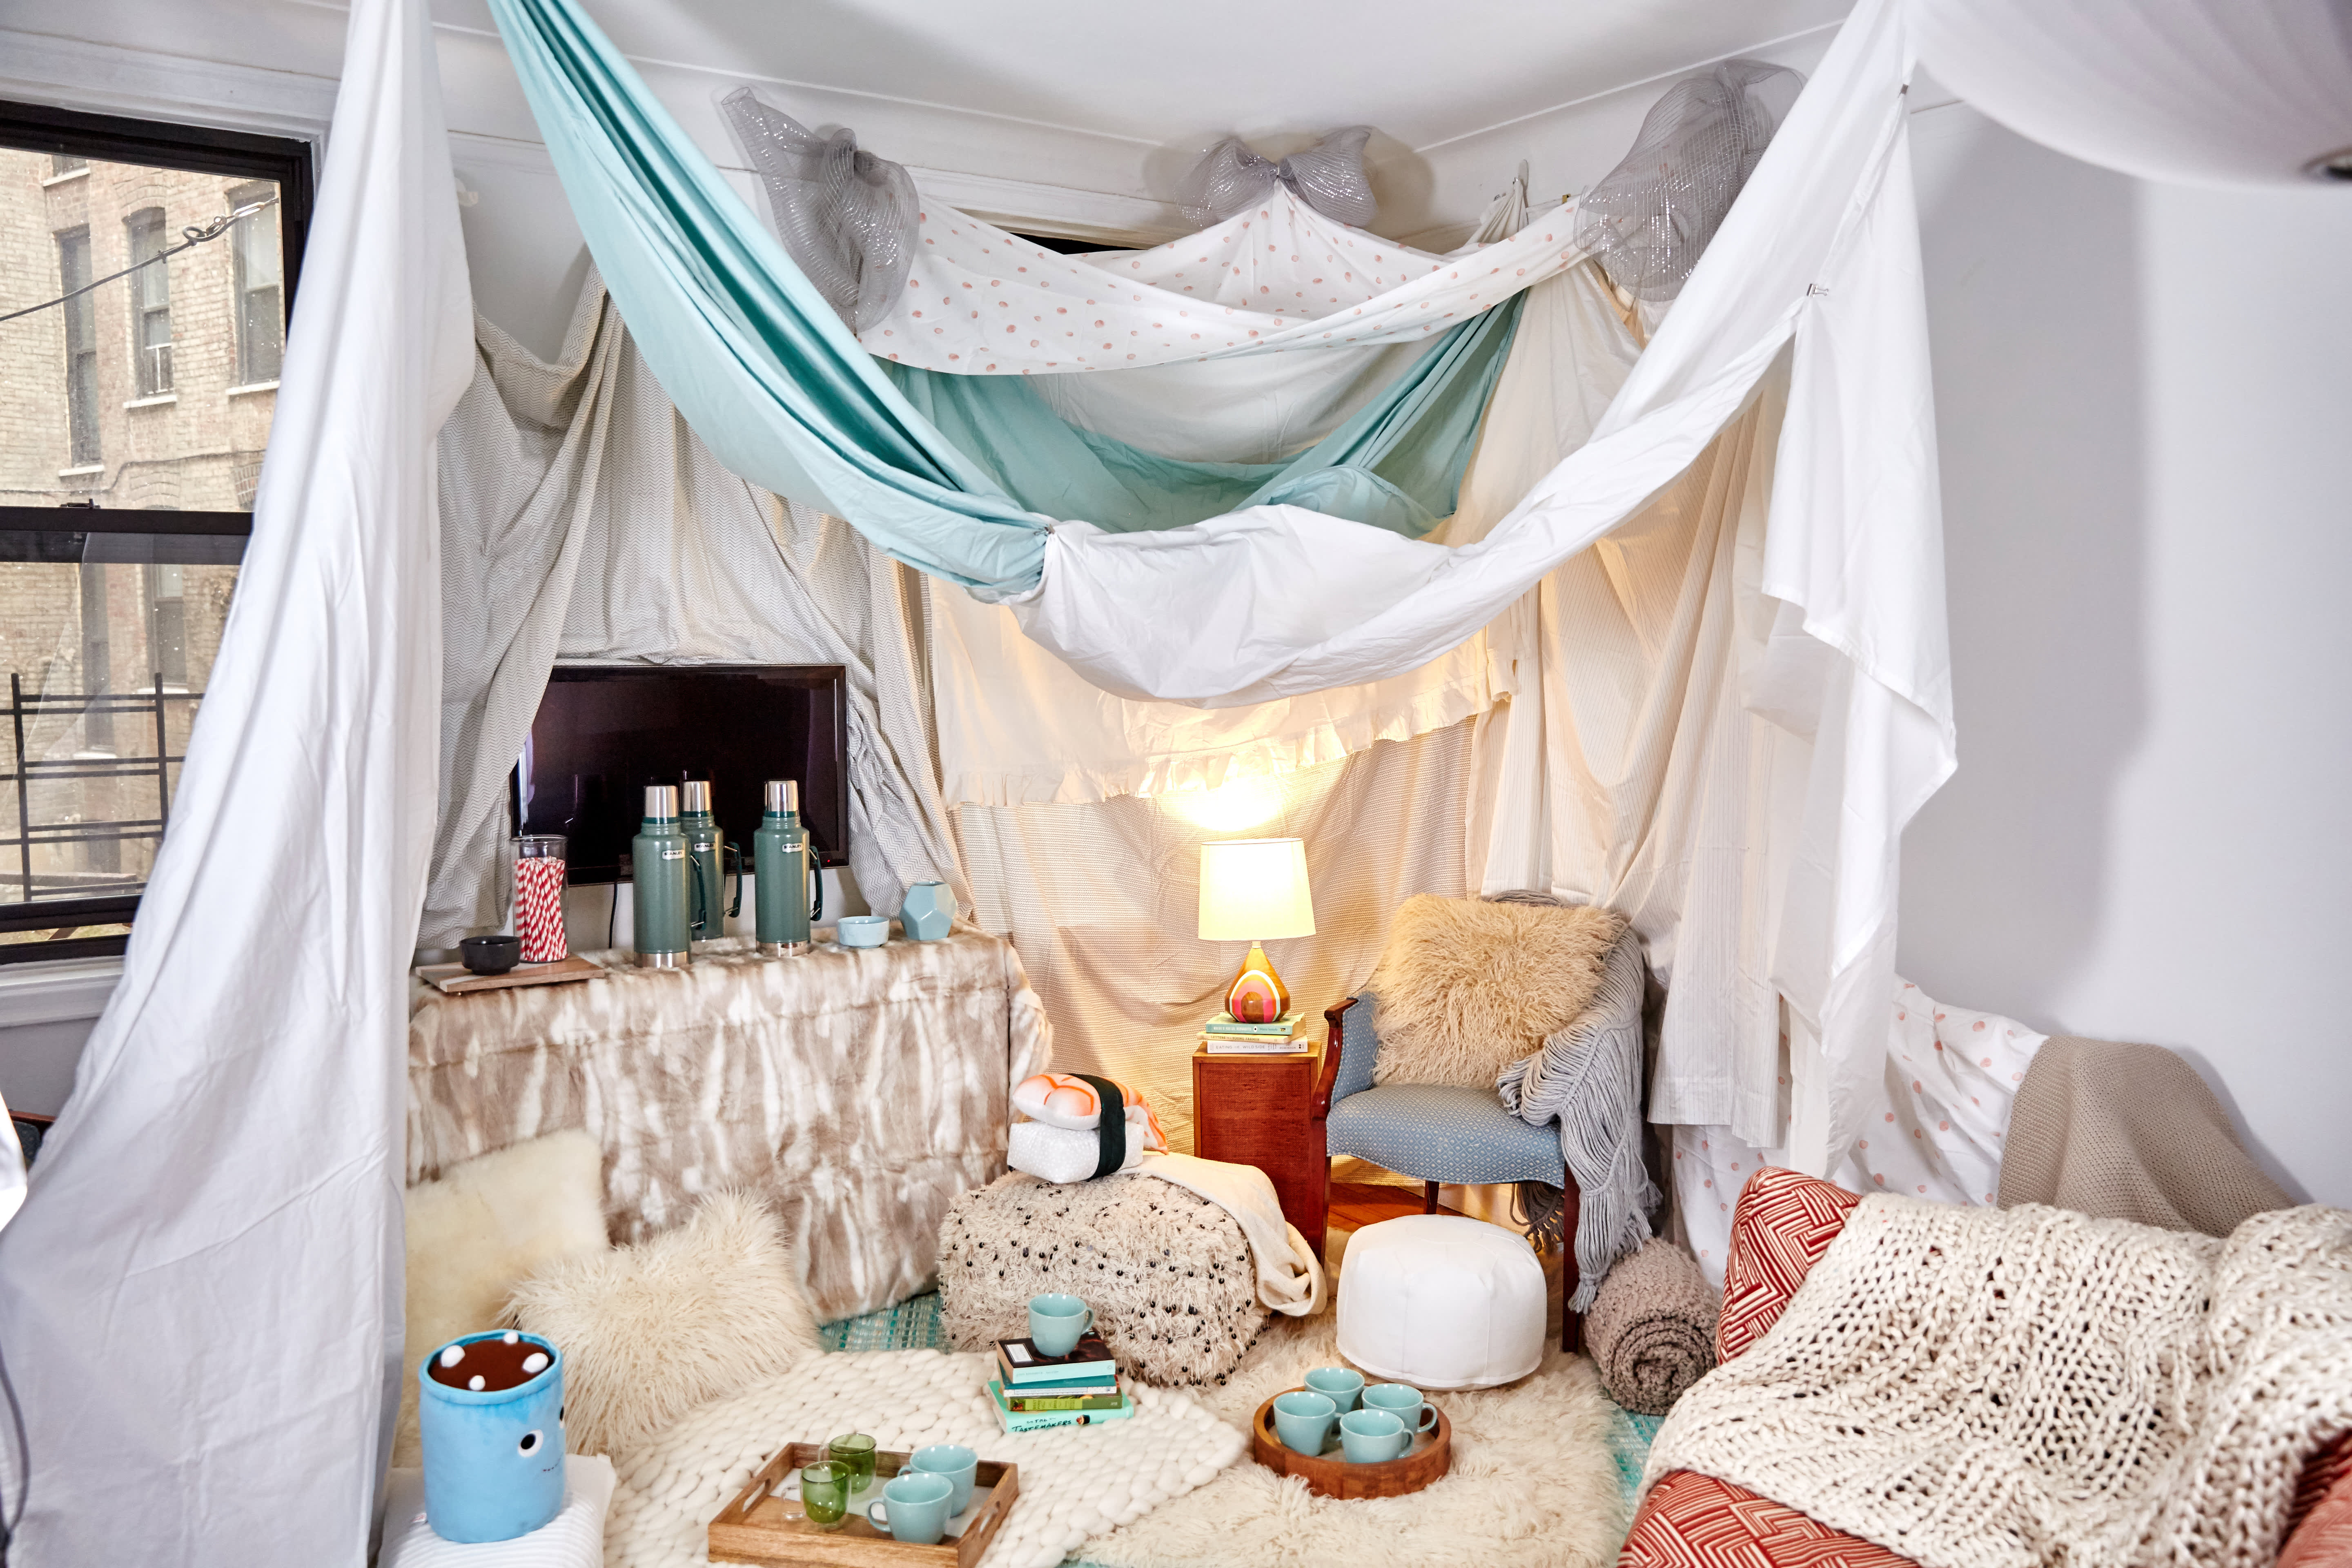 How to Make a Blanket Fort: 4 Easy Steps